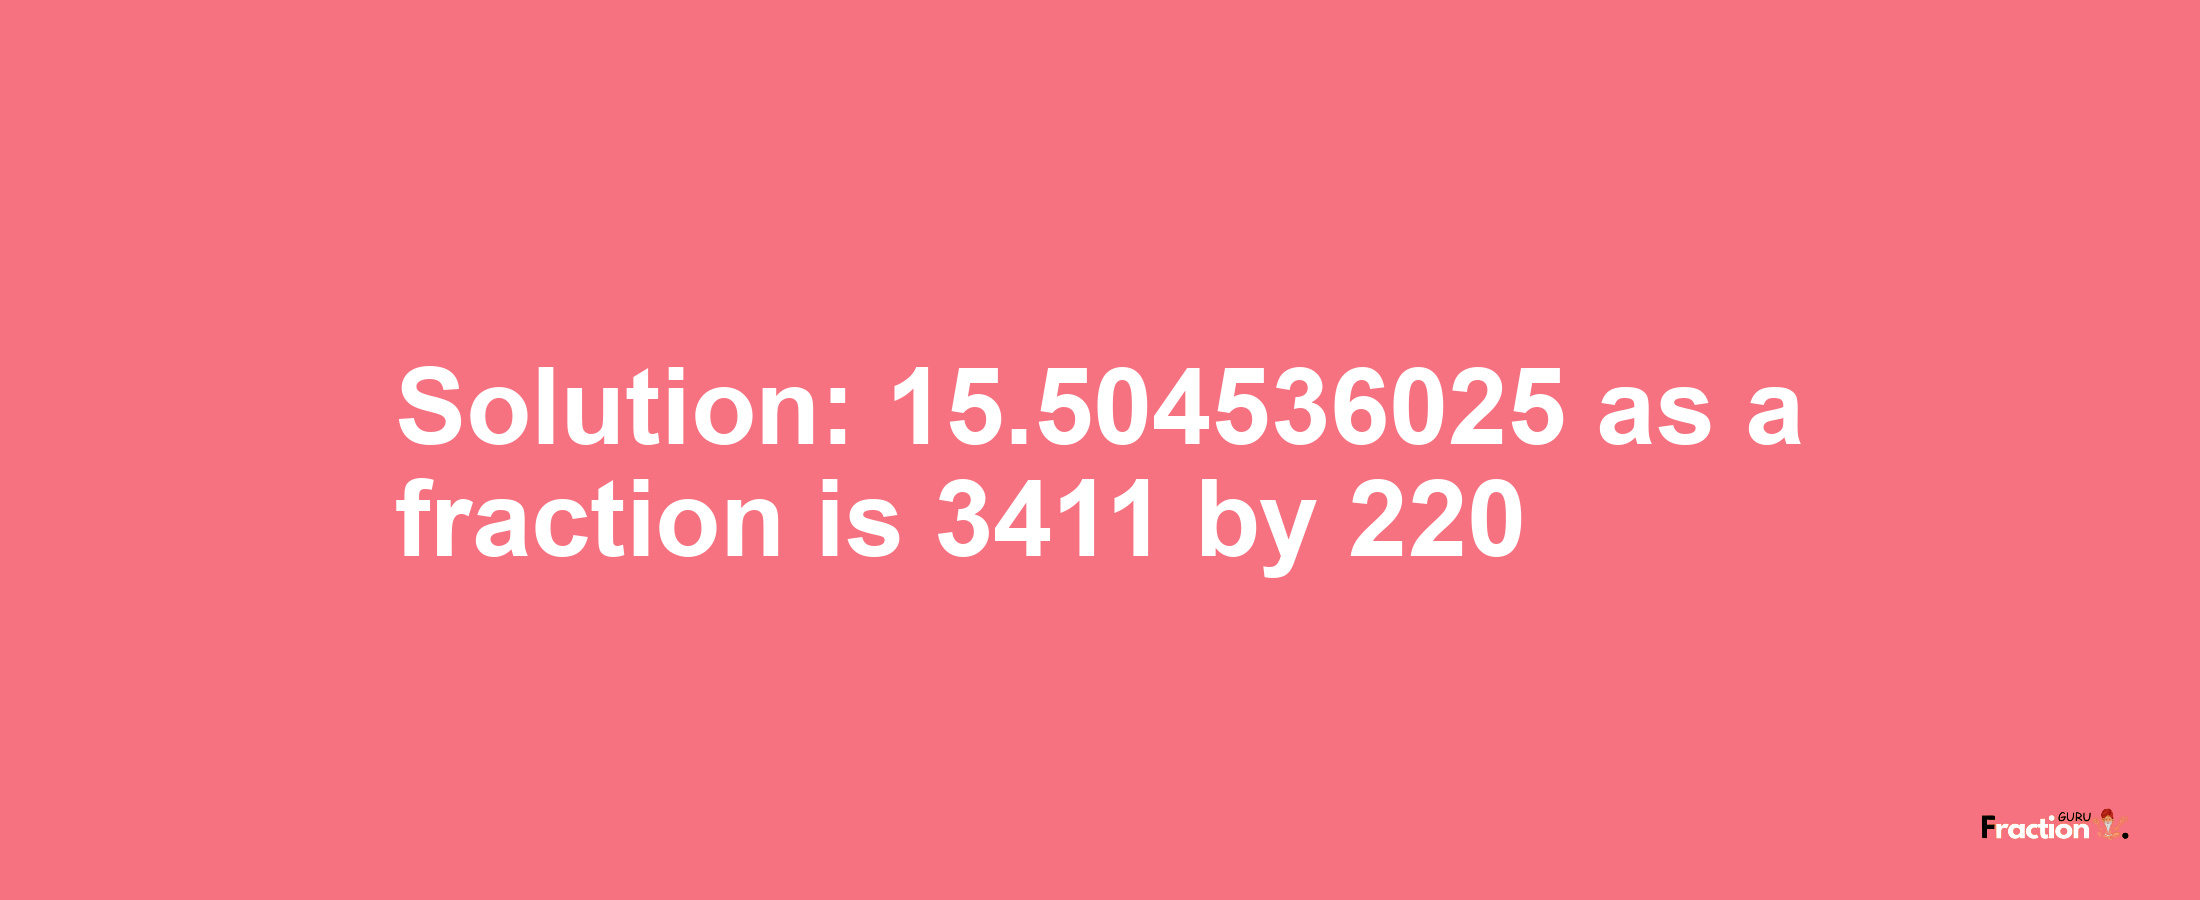 Solution:15.504536025 as a fraction is 3411/220